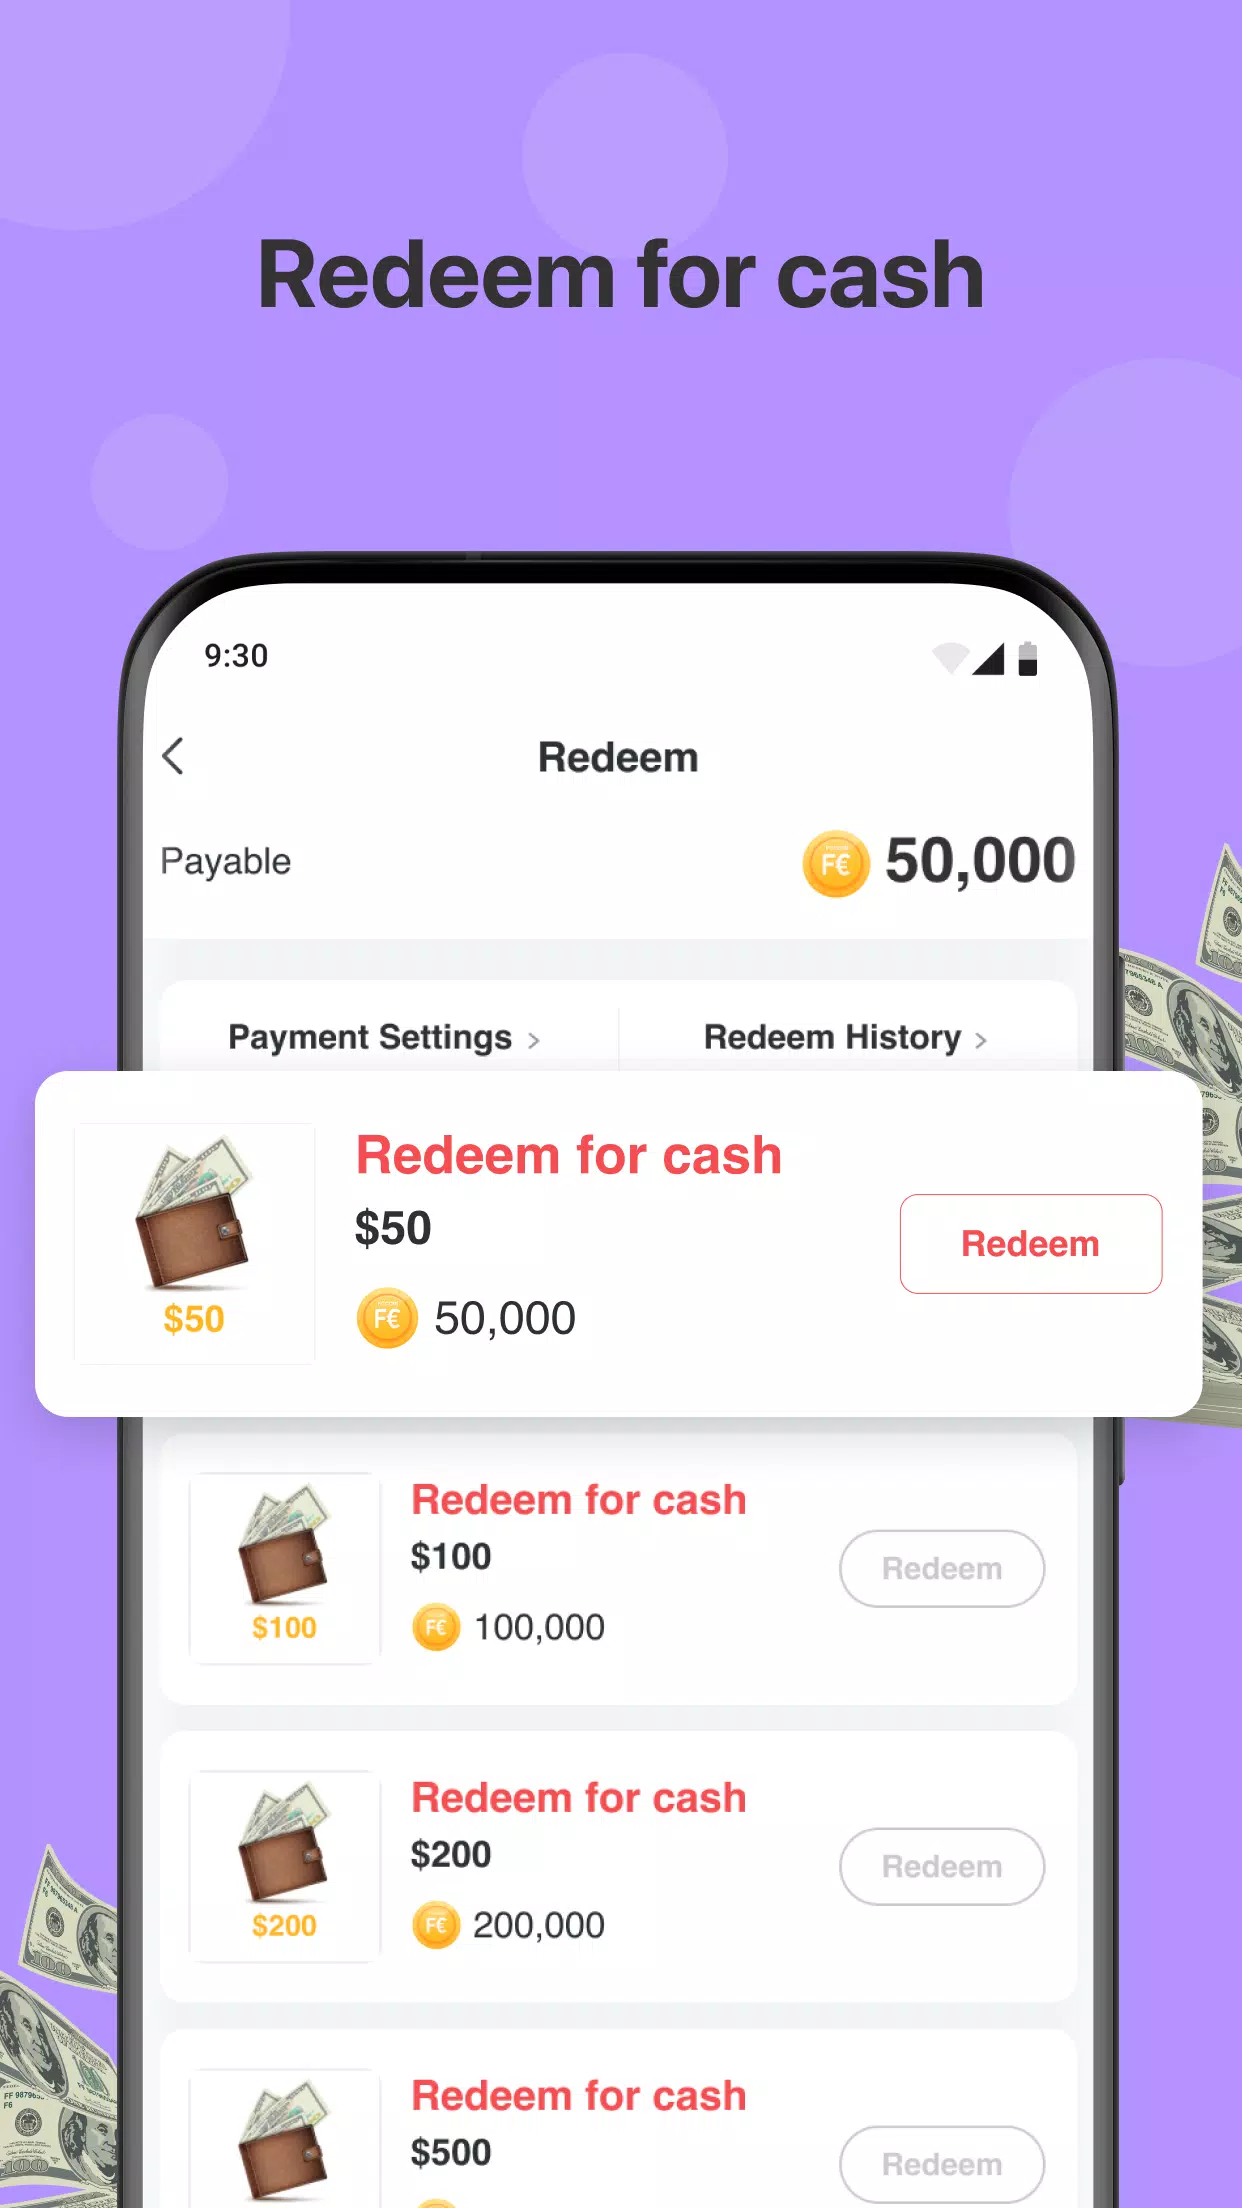 FatCoupon - New: Get free Robux by completing daily tasks in the FatCoupon  App and on FatCoupon.com. Earn up to $30/day. Cash out when your balance  reaches $50. #Robux #Roblox #FreeRobux #FatCoupon #